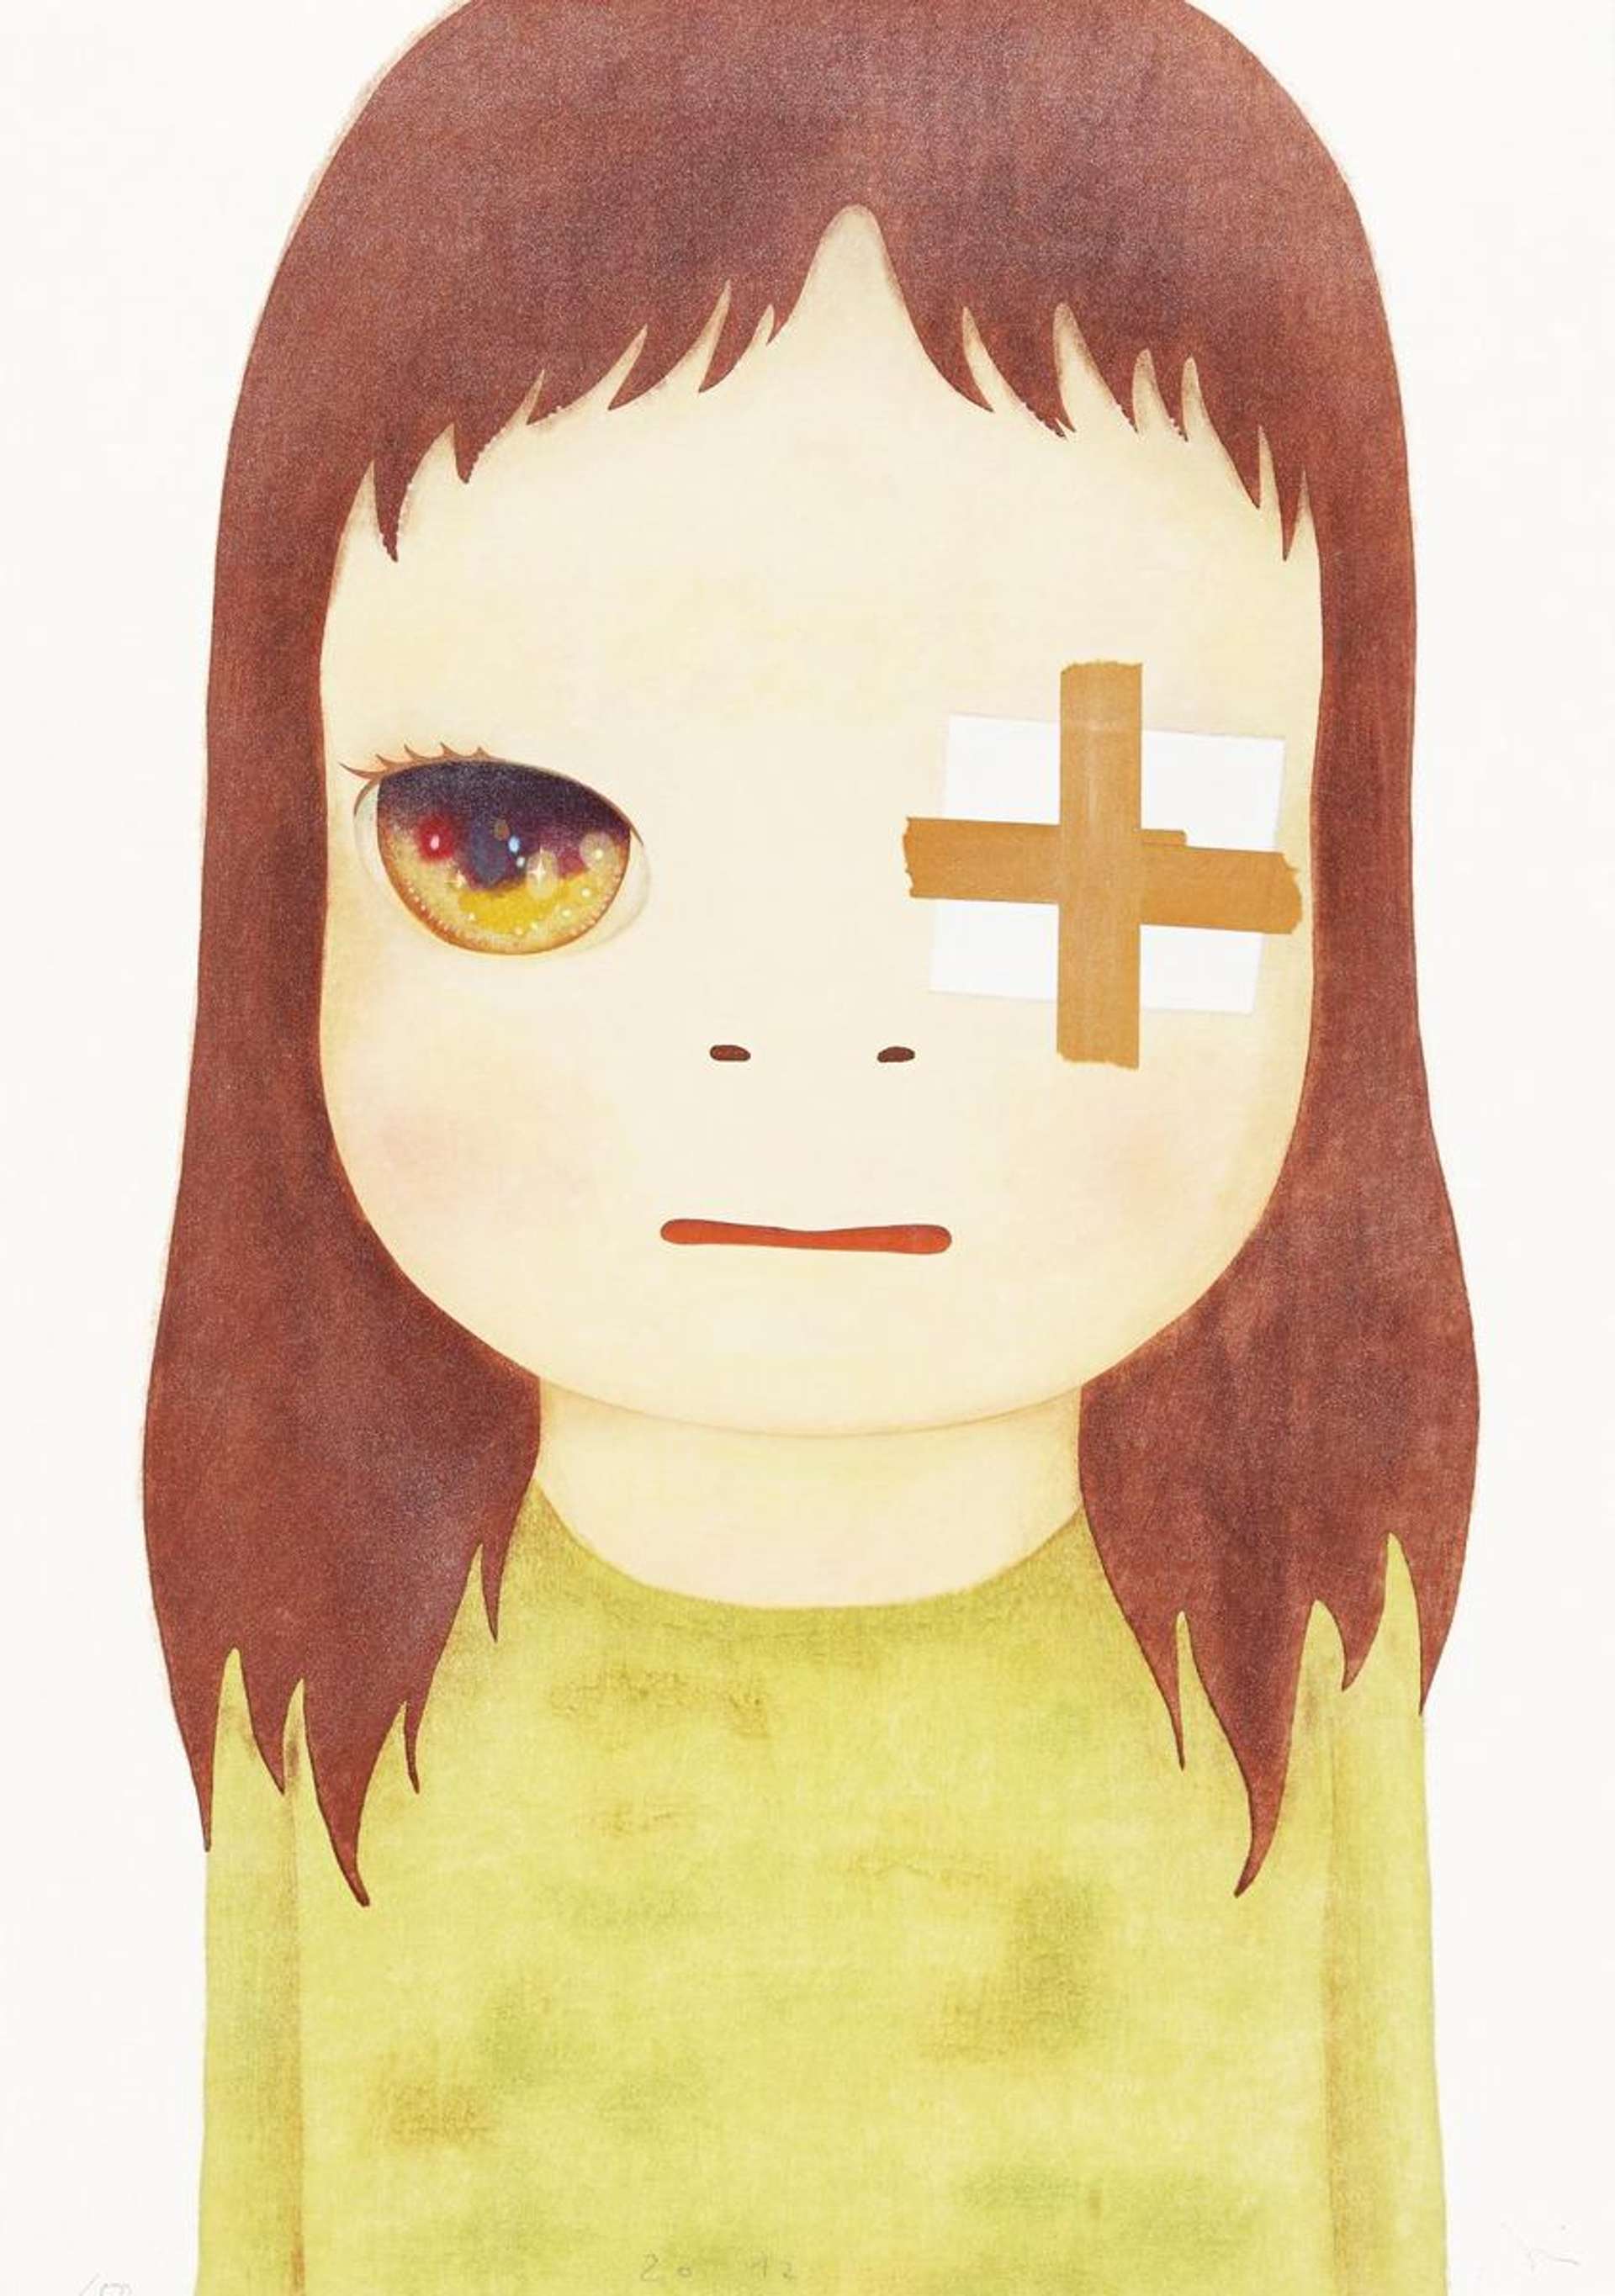 Yoshitomo Nara’s Untitled (Eye Patch). A woodcut print of a girl with eye covered with bandage Yoshitomo Nara’s Untitled (Eye Patch). A woodcut print of a girl with eye covered with bandage 